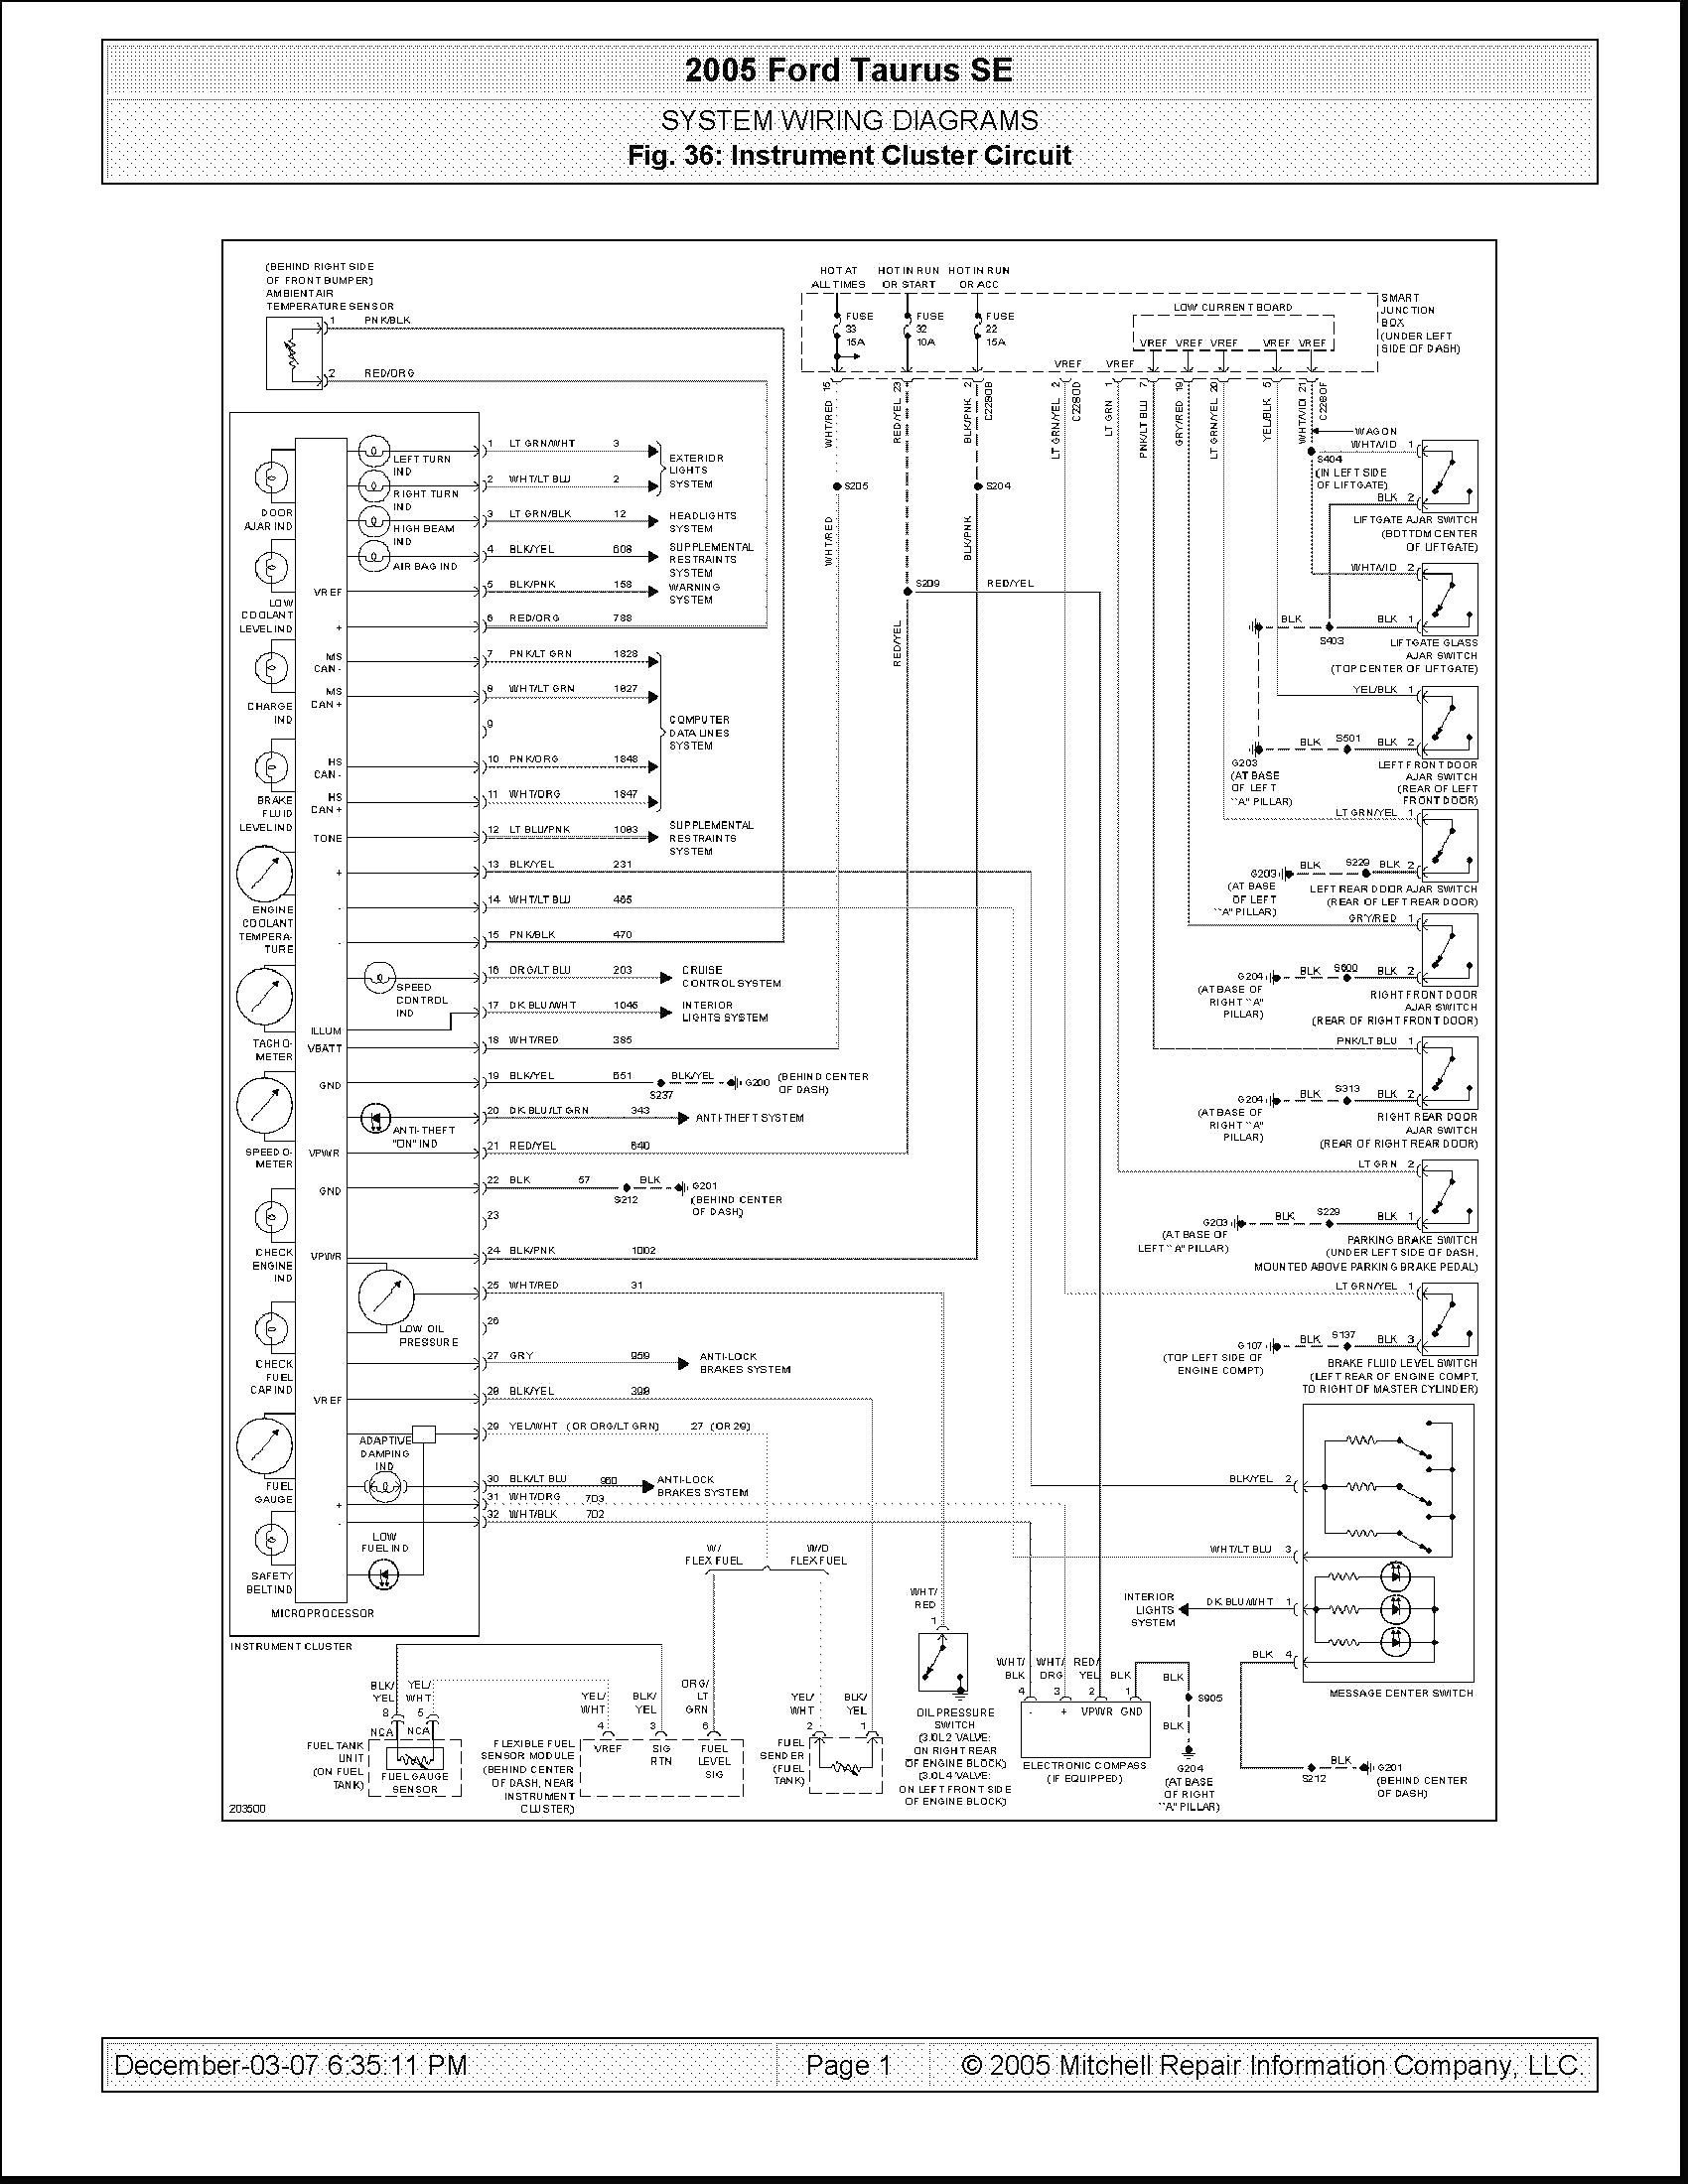 1995 ford Taurus Engine Diagram 1995 ford Ranger Wiring Diagrams Mercedes Benz W202 and 2004 Radio Of 1995 ford Taurus Engine Diagram